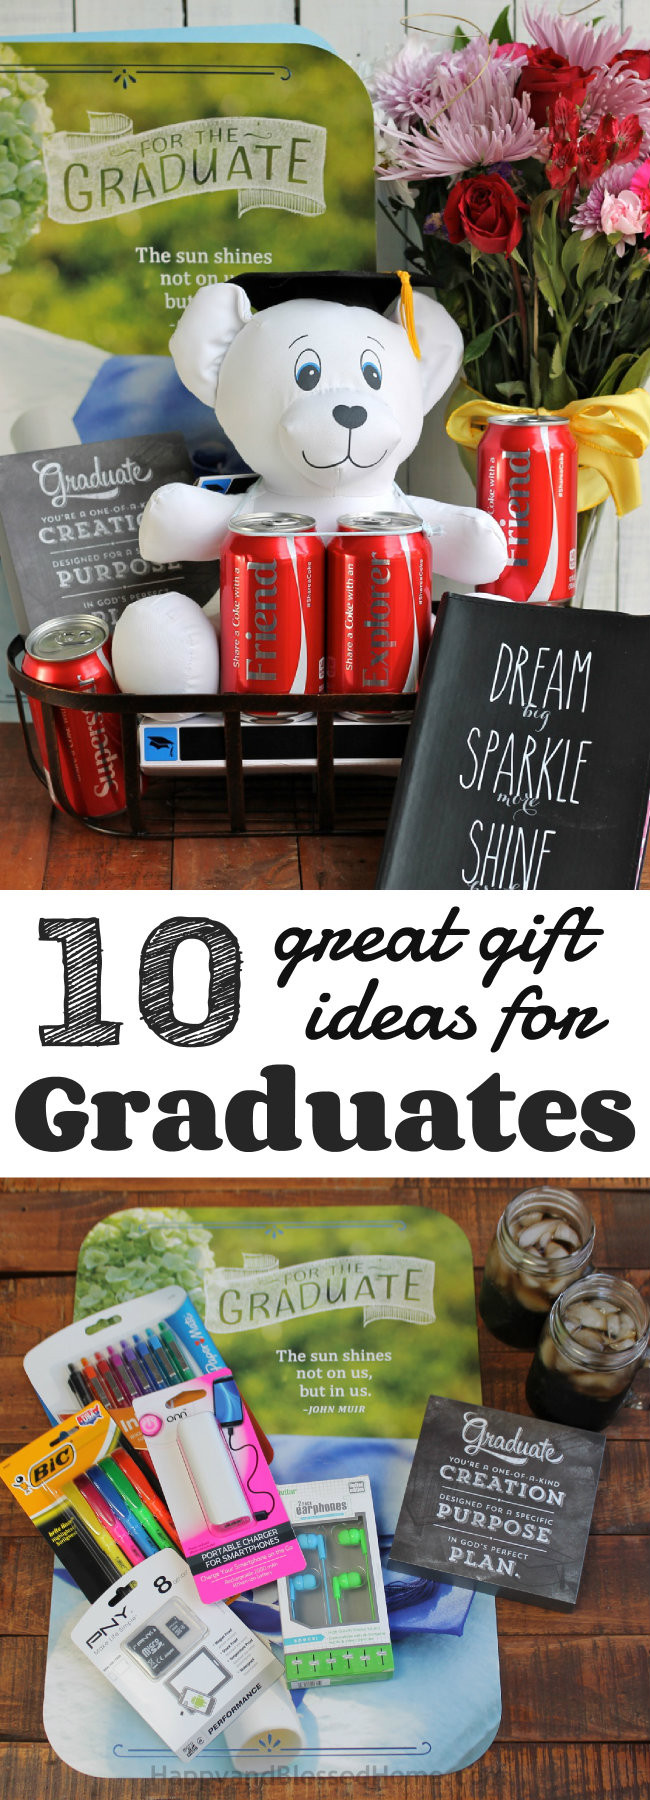 Cheap Graduation Gift Ideas For Friends
 10 Great Gift Ideas for Graduates